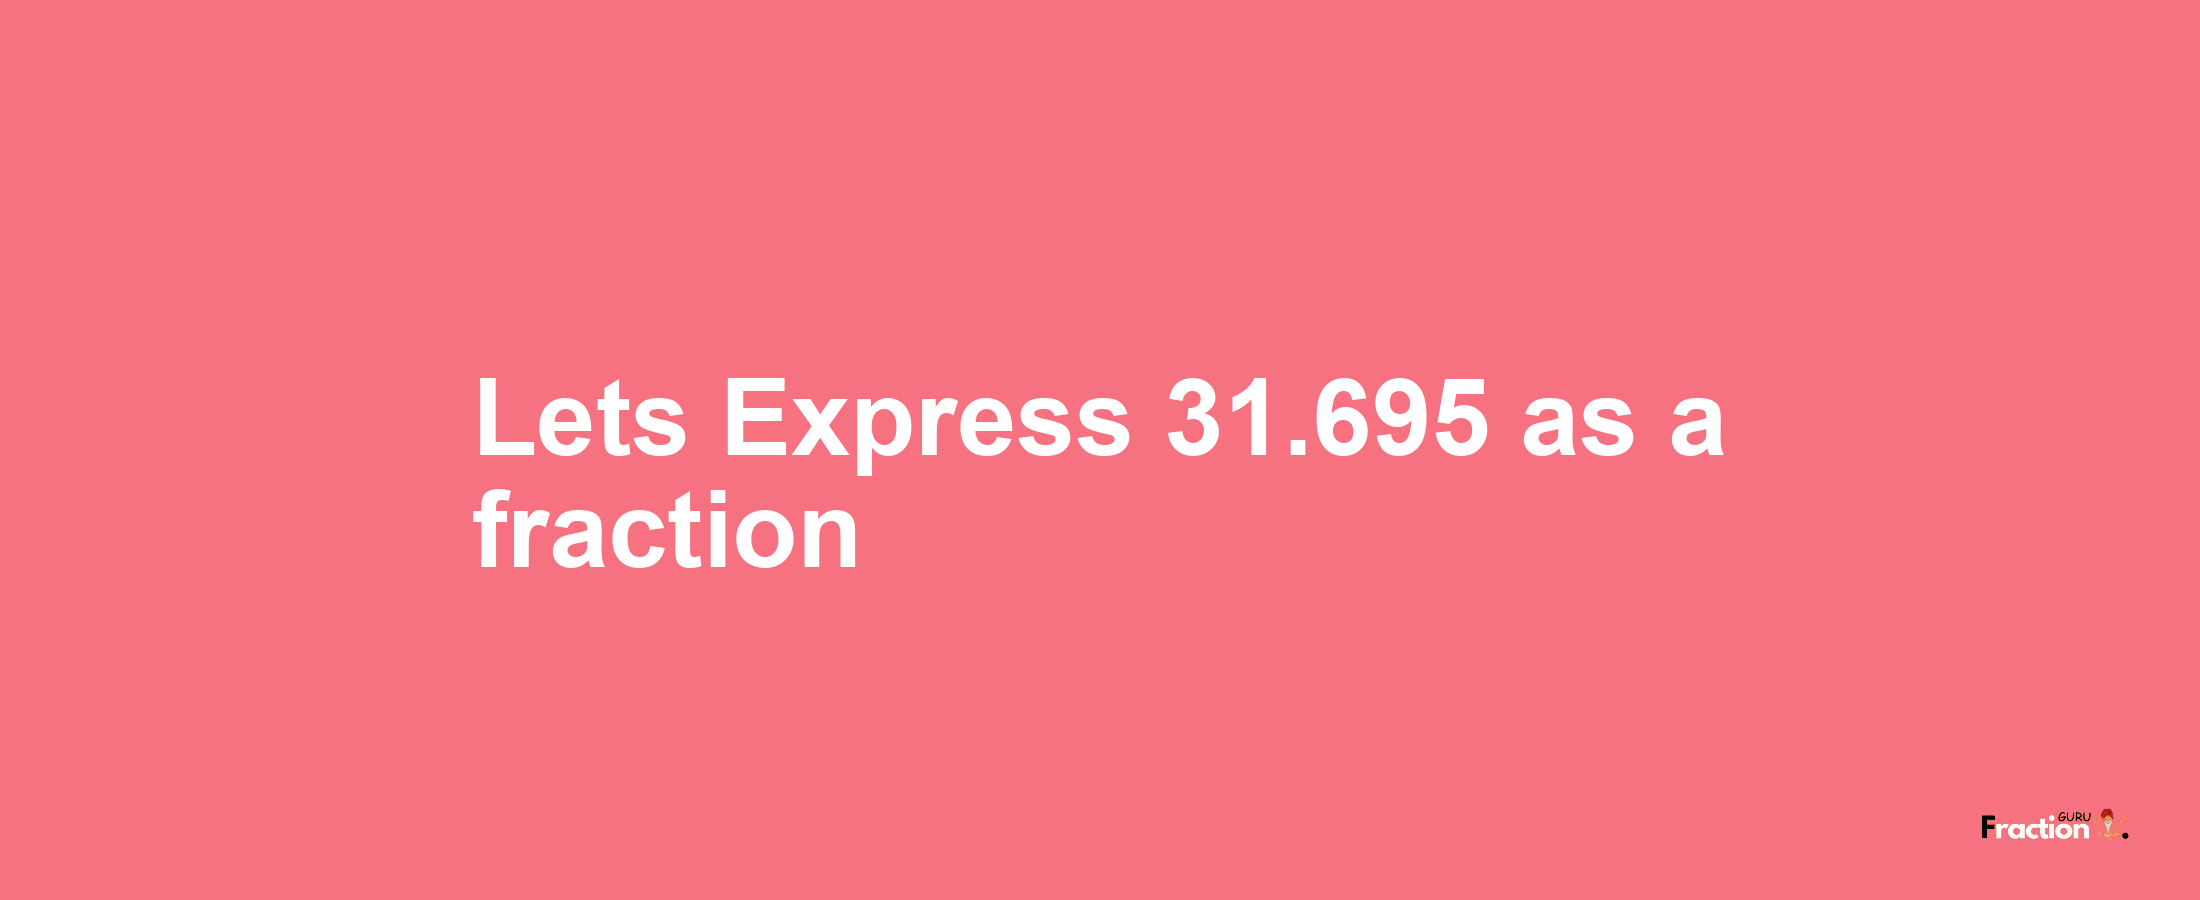 Lets Express 31.695 as afraction